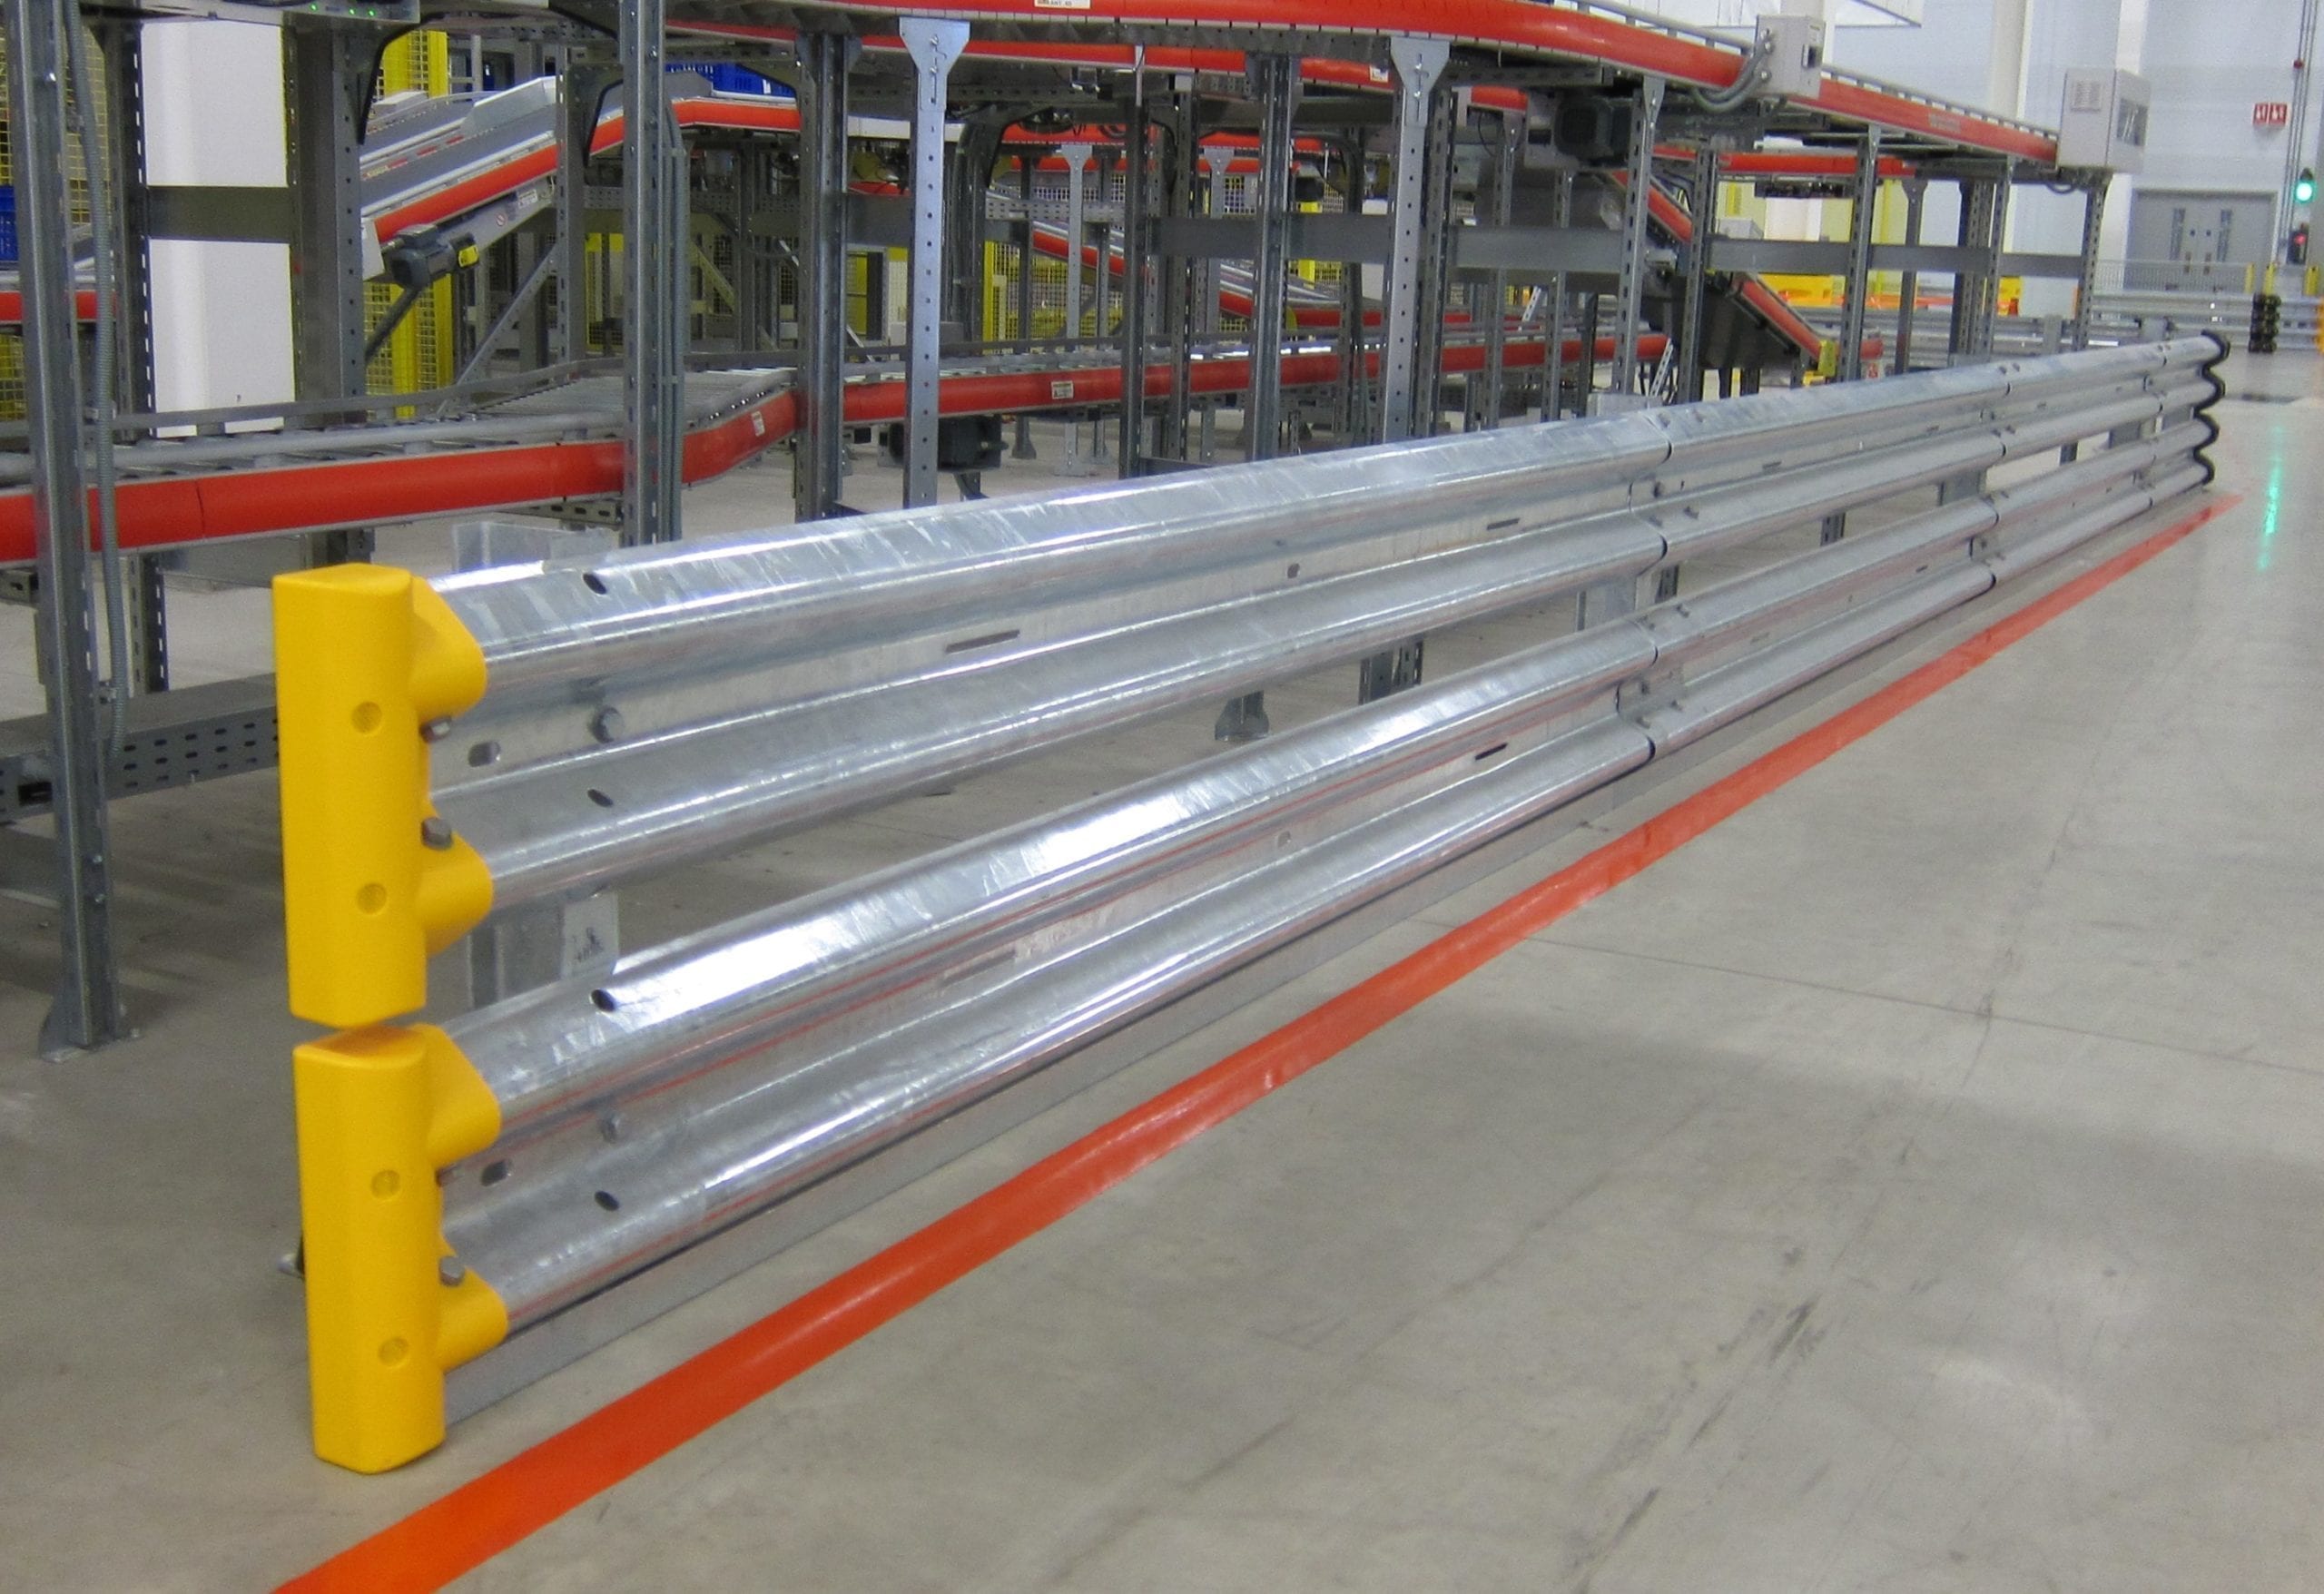 Armco 760D Safety Barrier